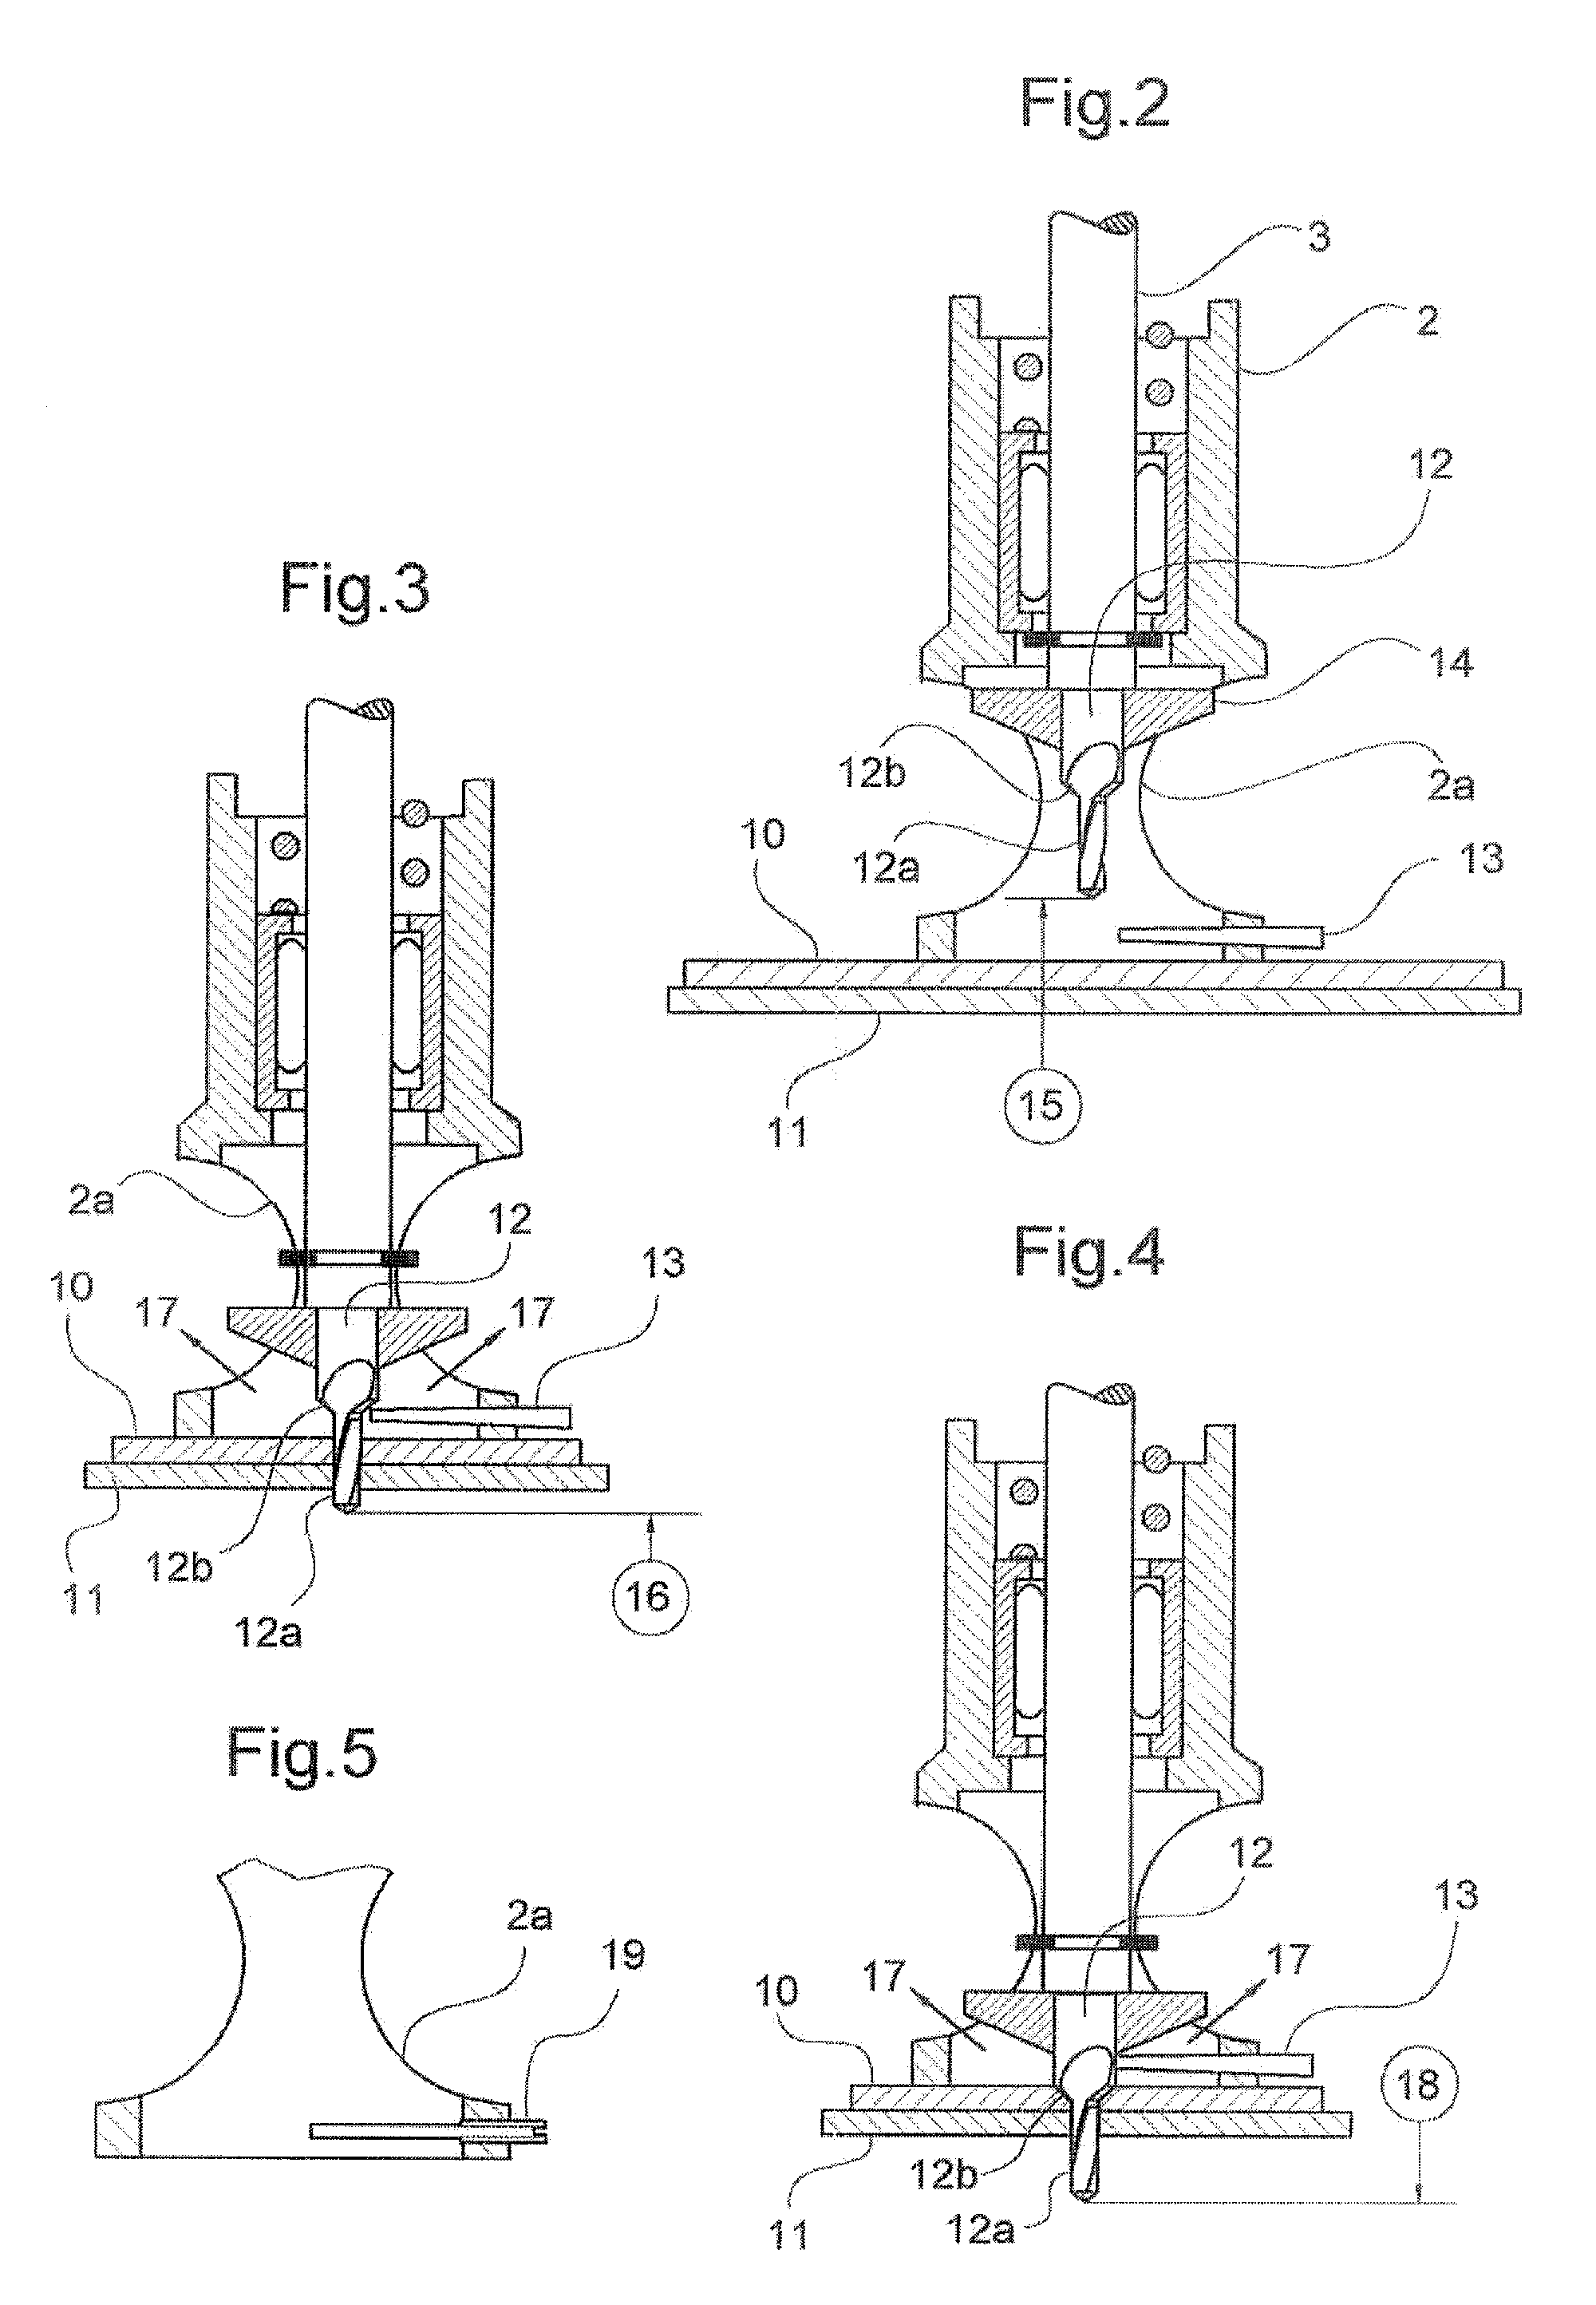 Device for limiting the advance during a drilling operation